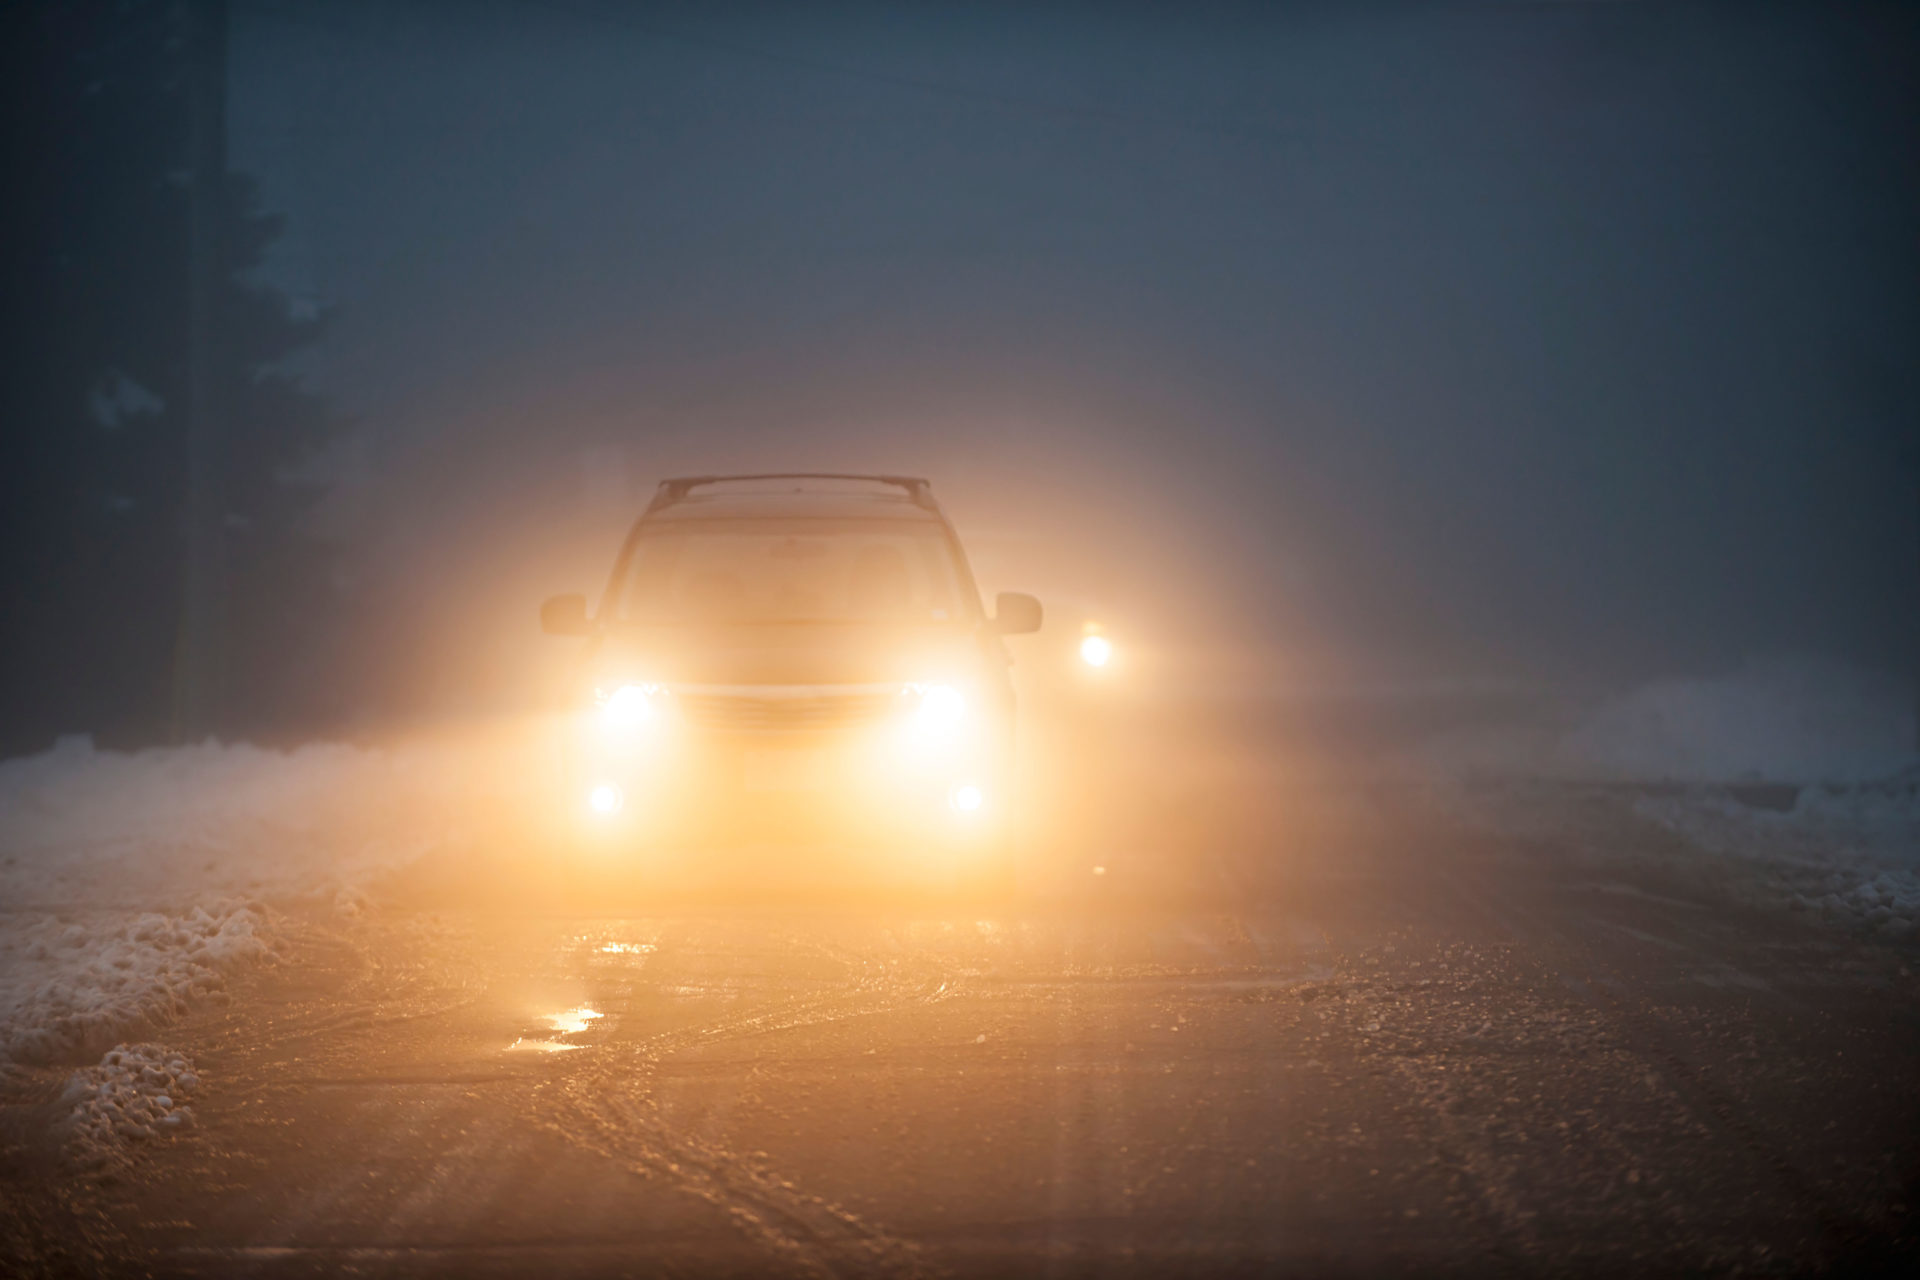 headlight glare is on the rise according to a new survey